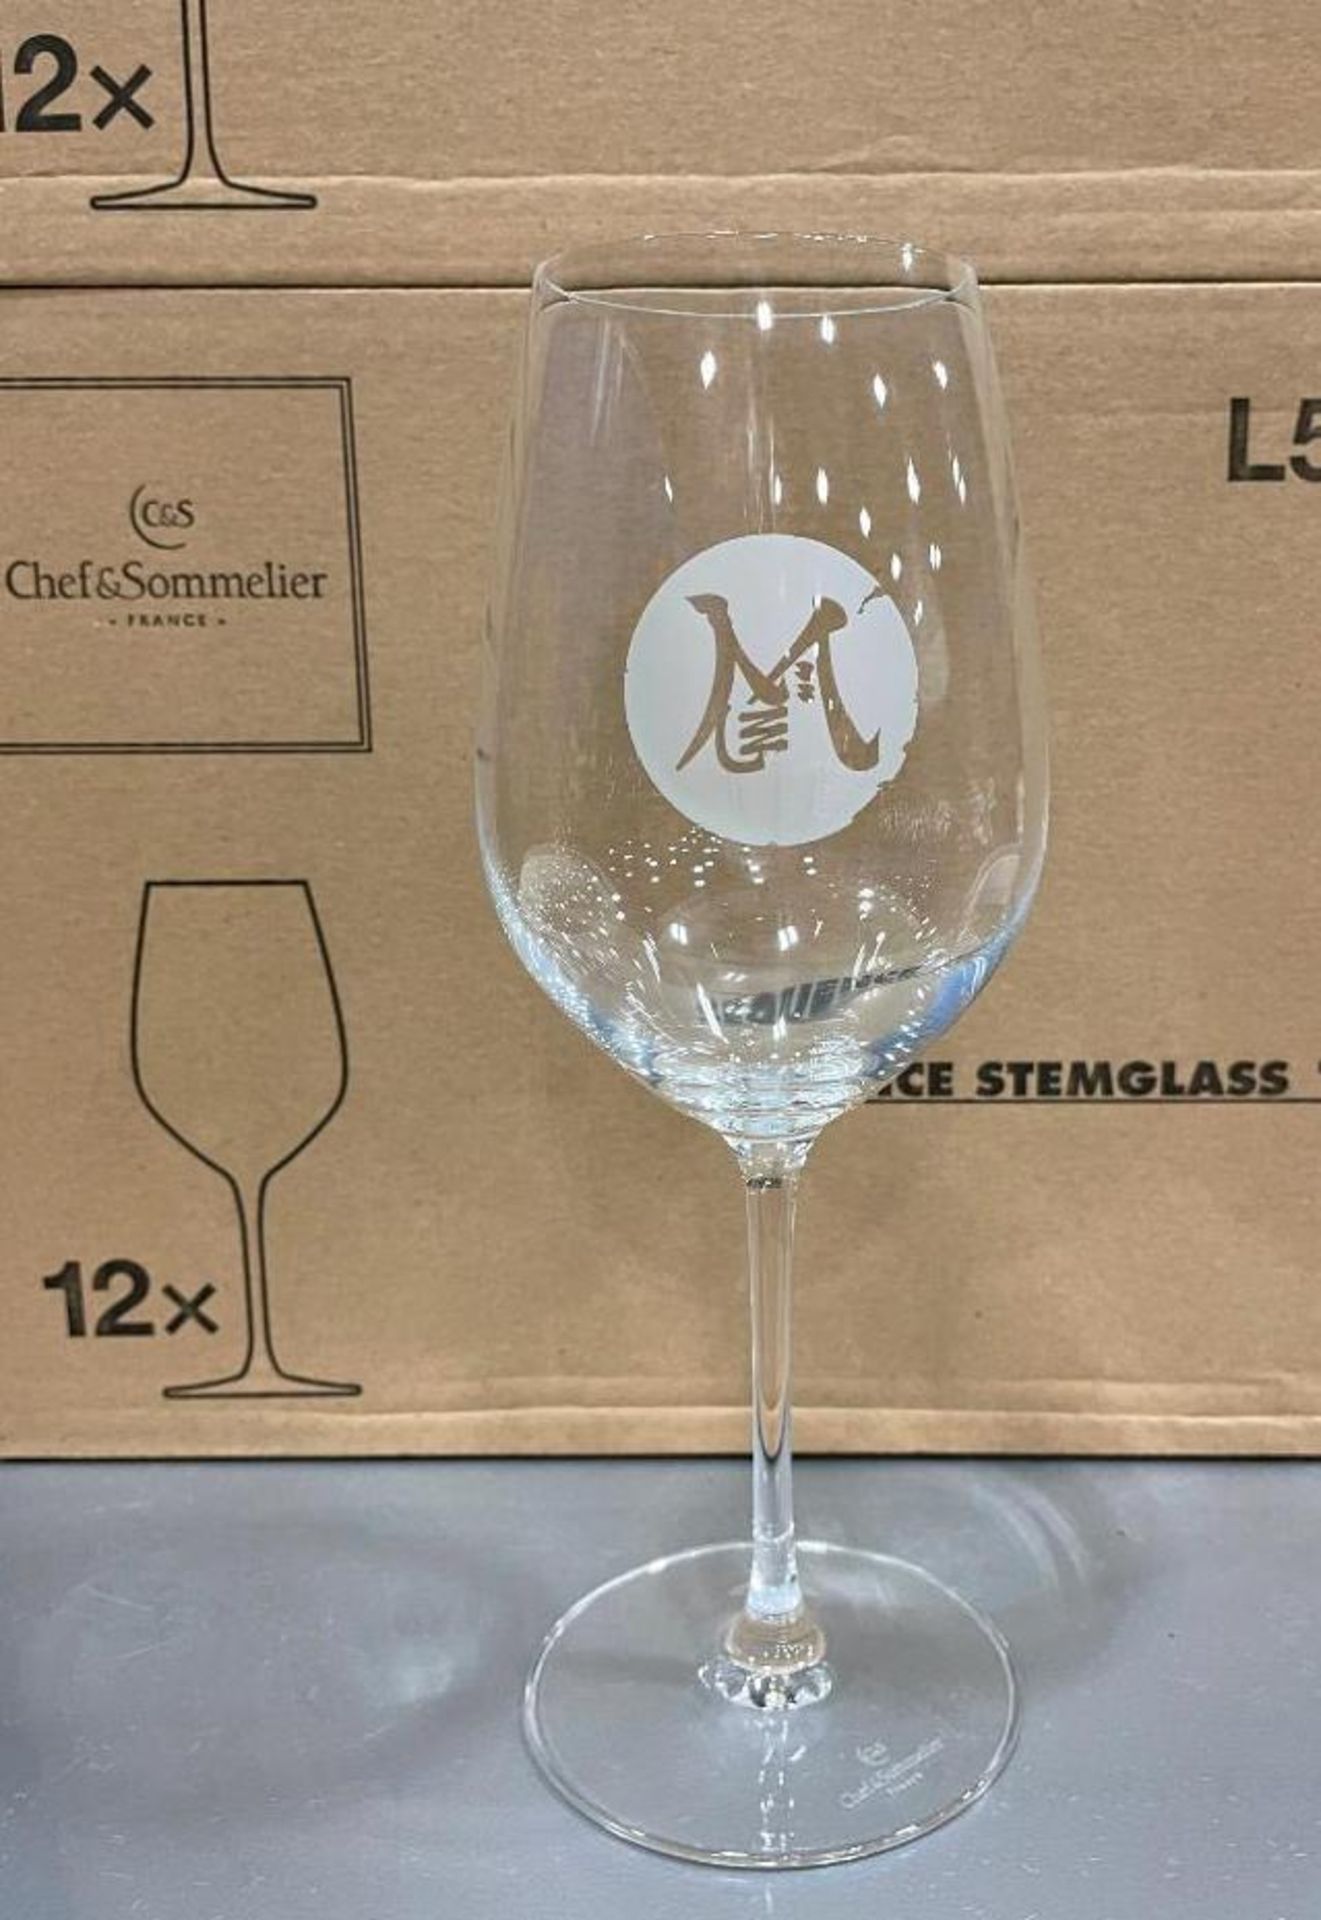 3 CASES OF 19 OZ. SEQUENCE STEM GLASS, BRANDED MYSTIQUE, 12 PER CASE, ARCOROC L5638 - NEW